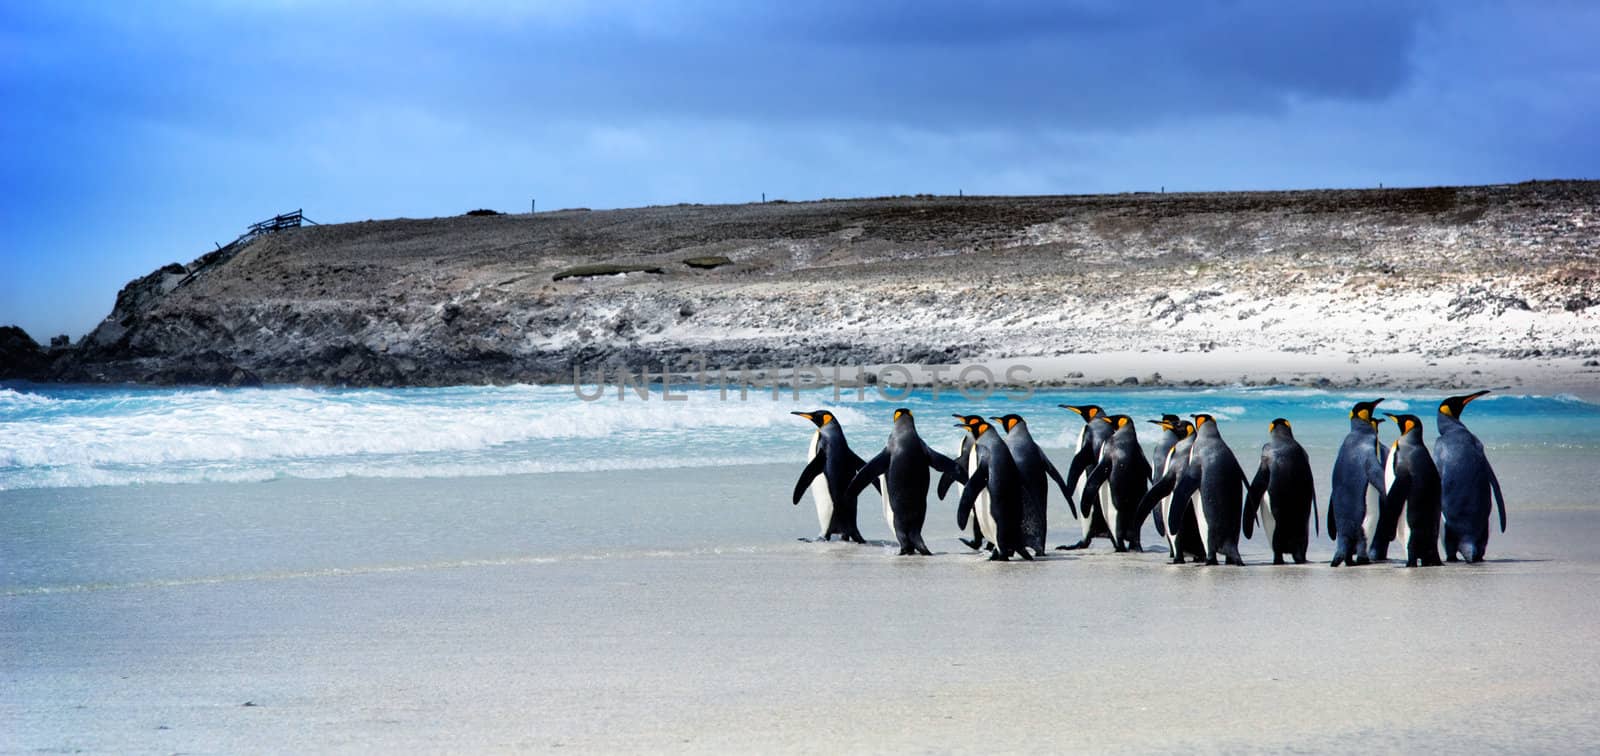 King Penguins by kwest